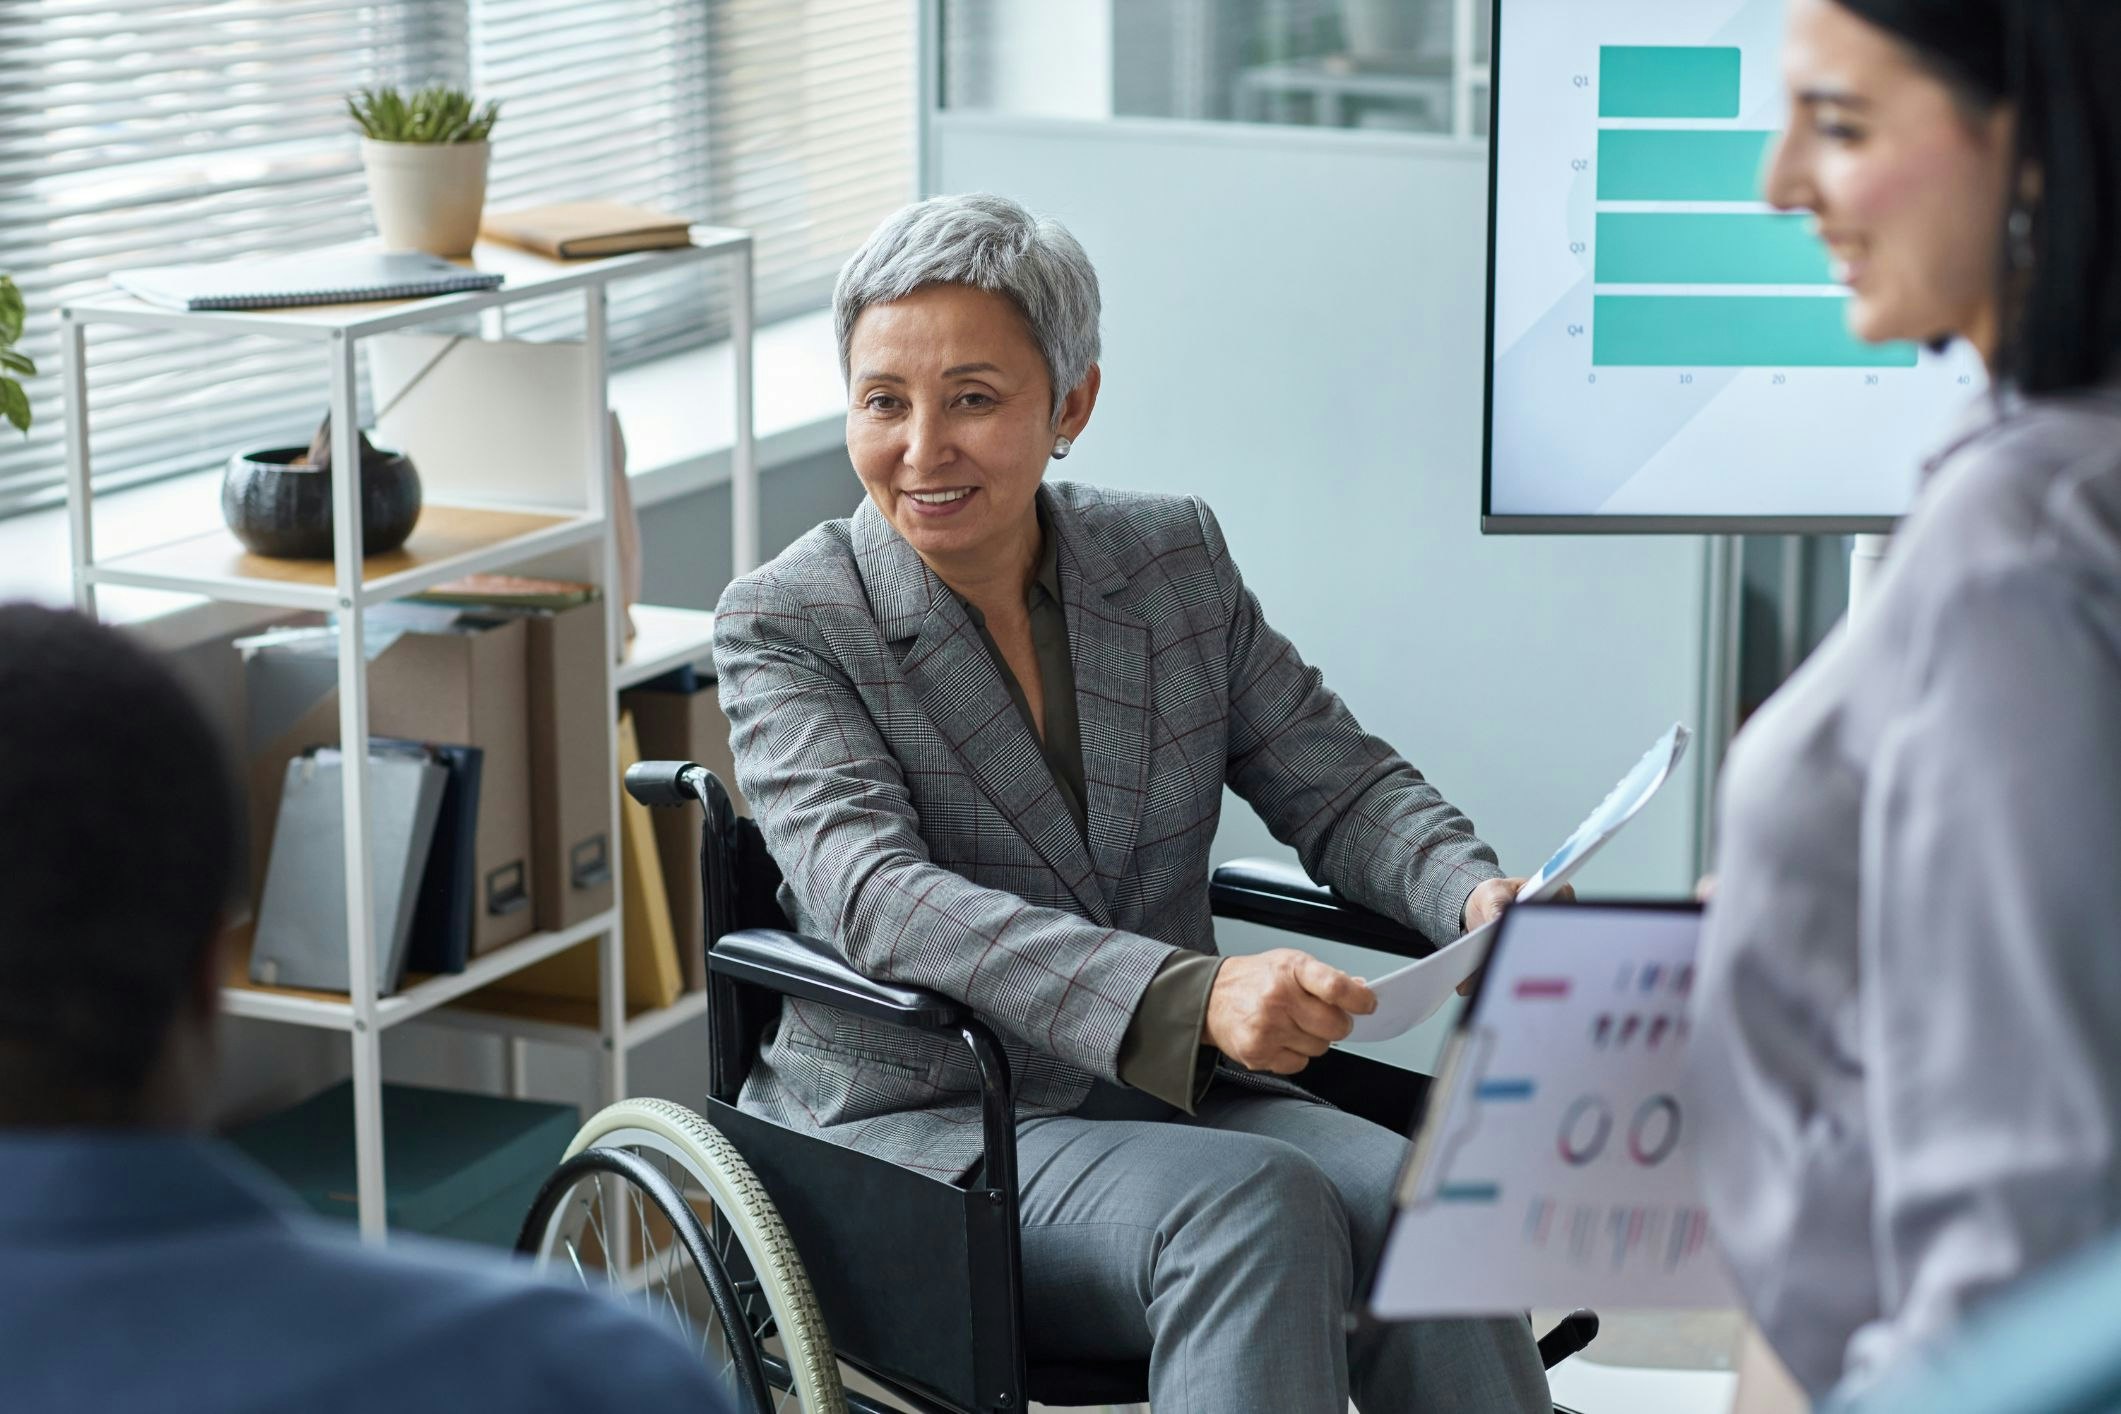 <p>The government released a progress update in response to the Disability Royal Commission’s final report, along with publishing new Disability Employment Services guidelines. [Source: Shutterstock]</p>
